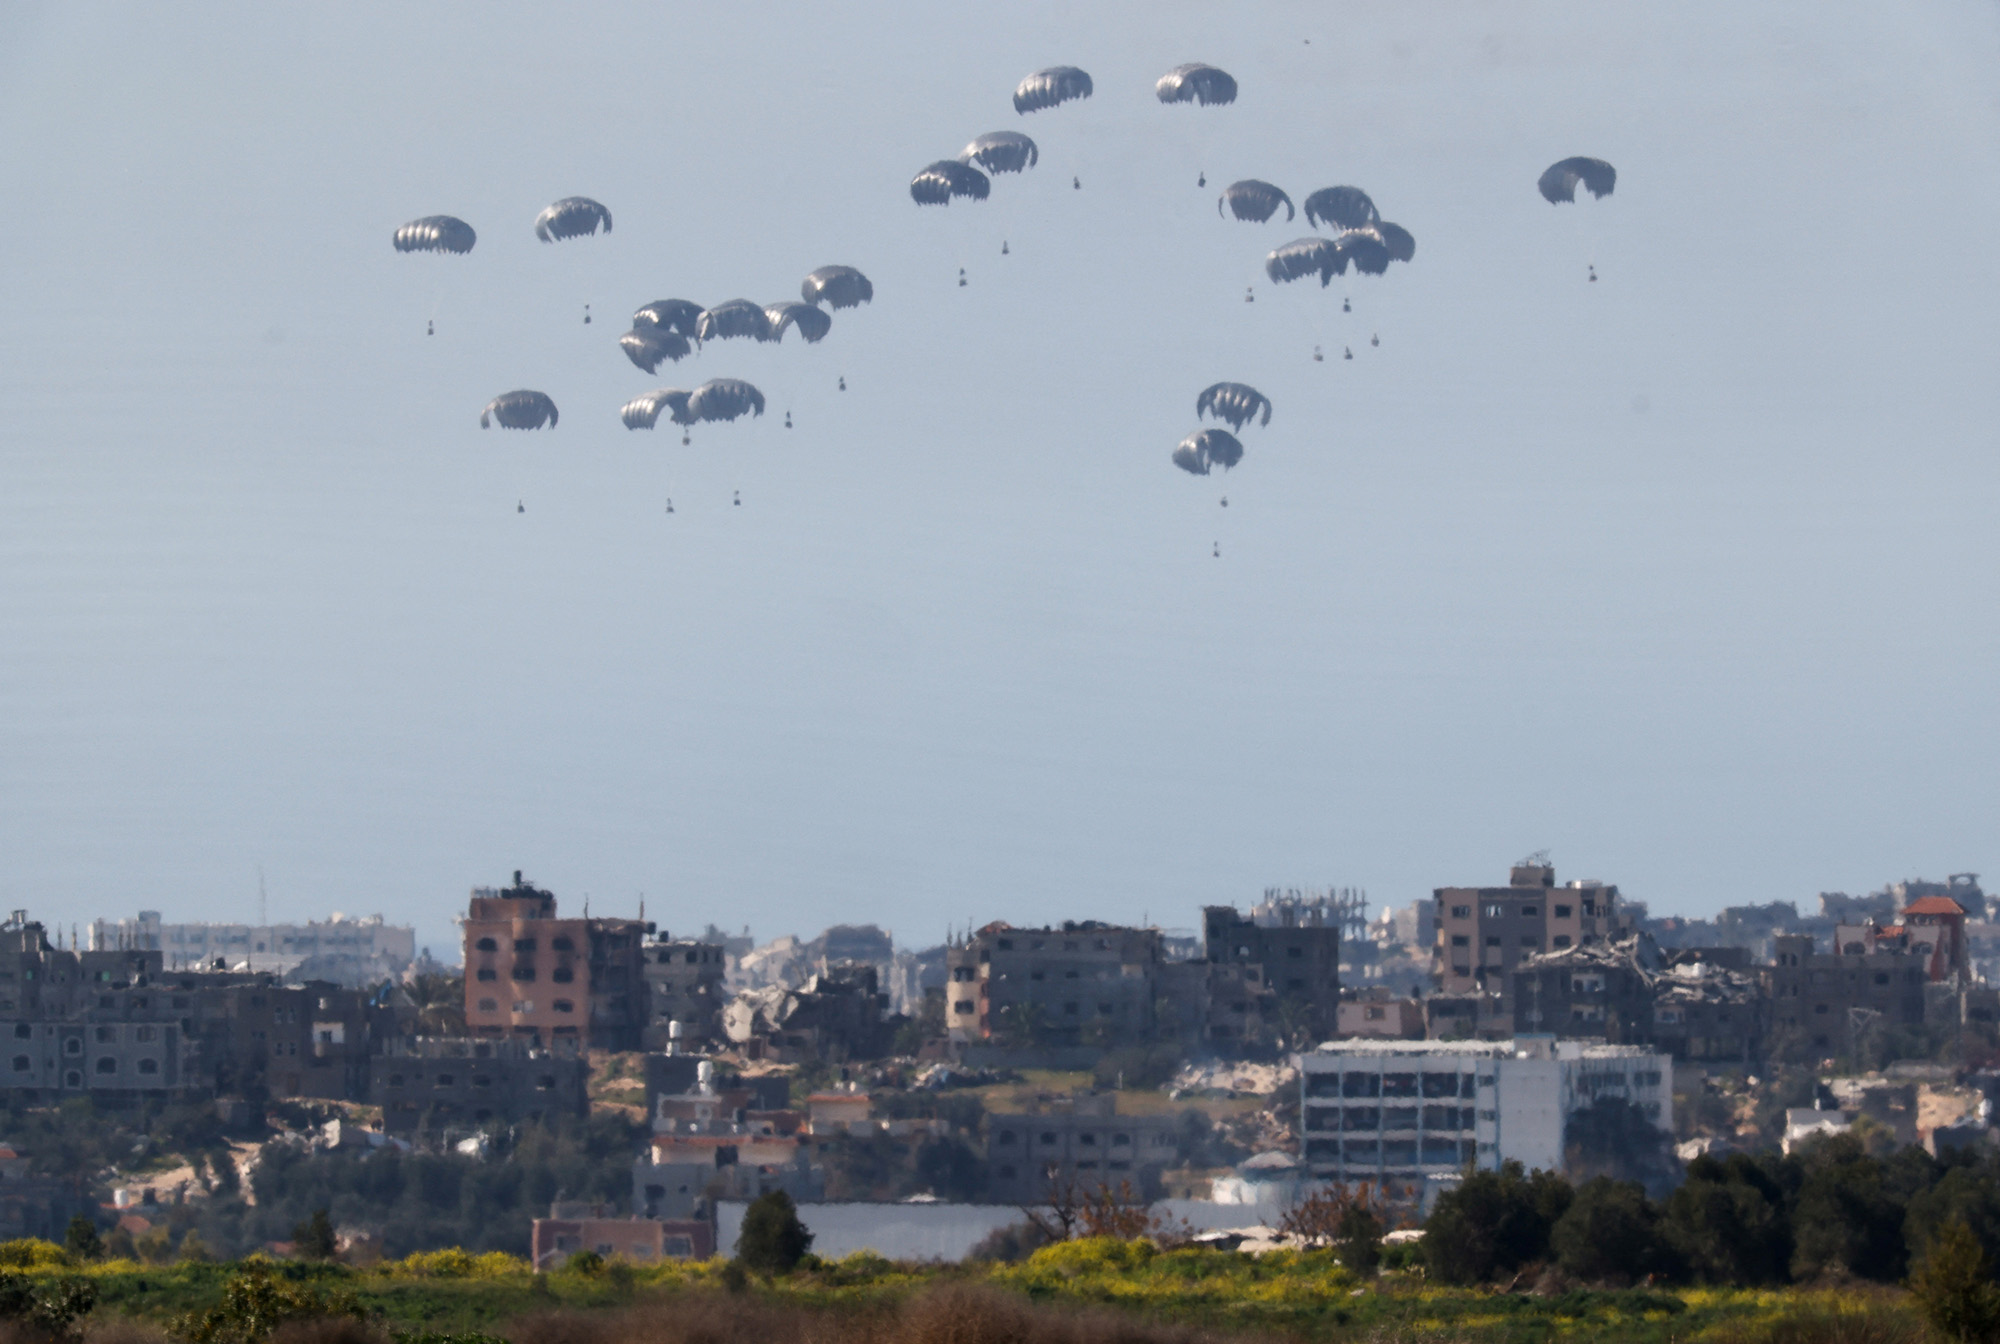 Packages fall towards Gaza after being dropped from a military aircraft as seen from southern Israel on March 5.